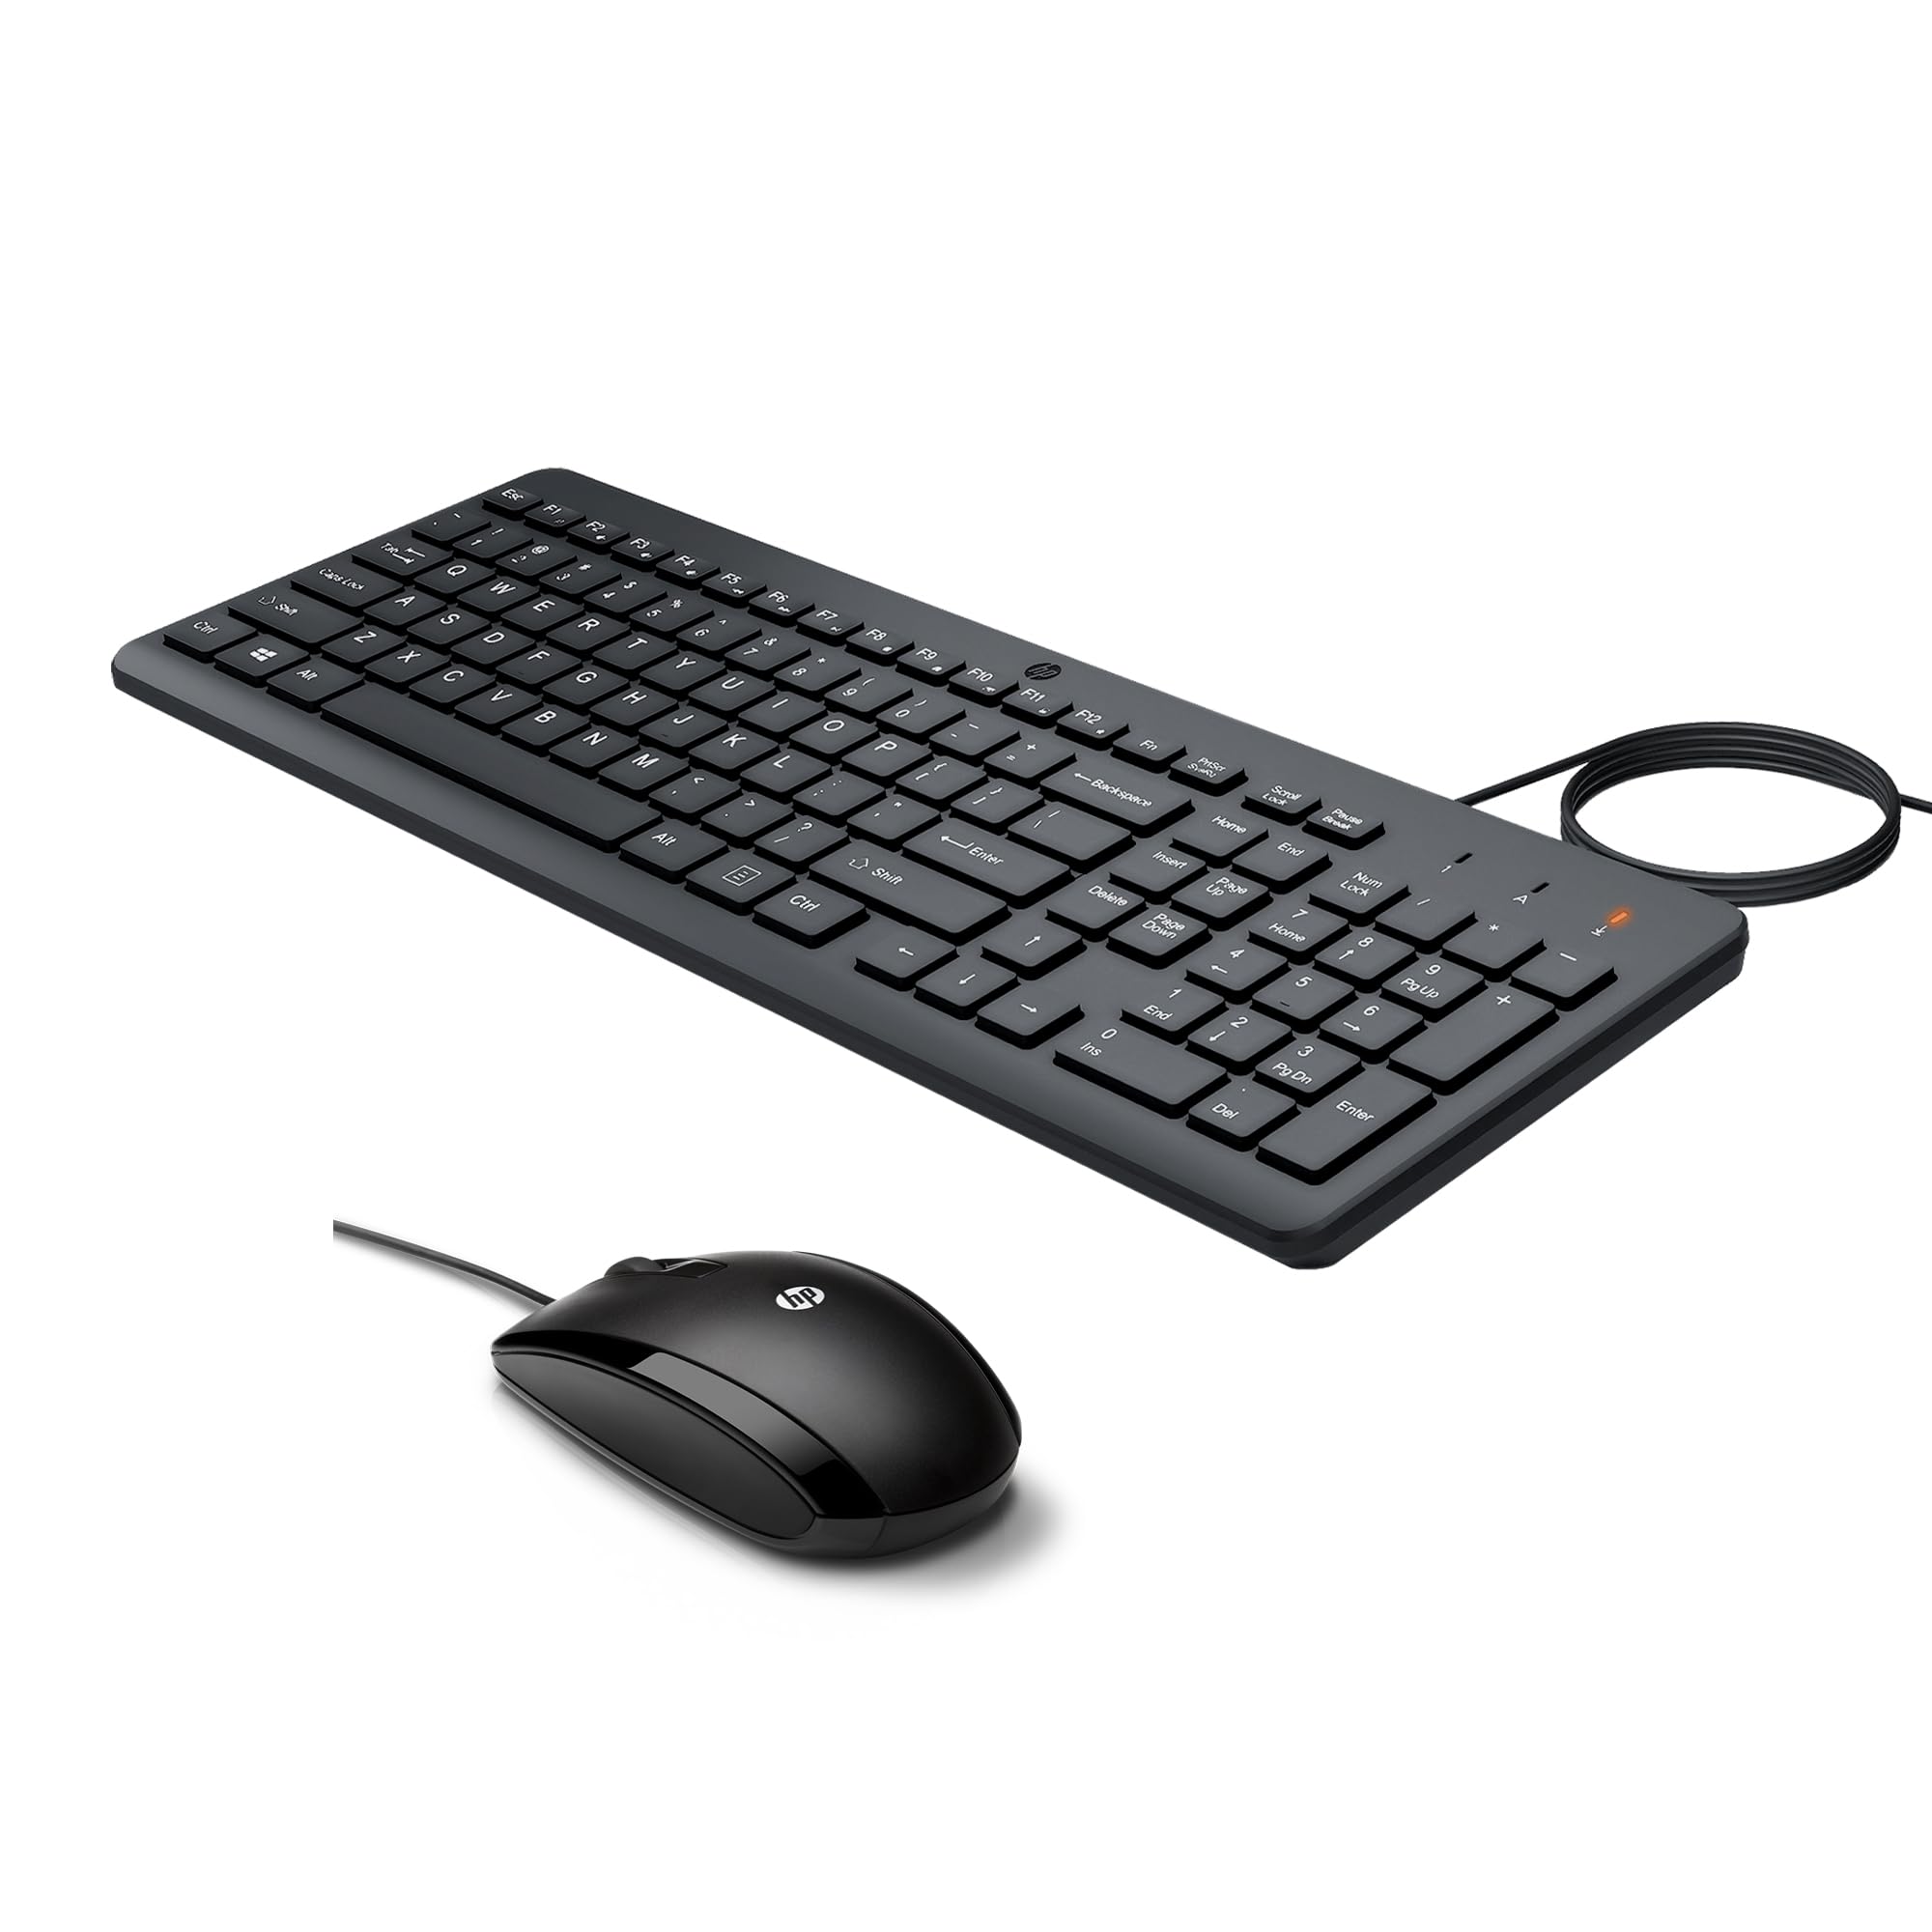 Bundle of HP X500 Wired USB Mouse & HP 150 Wired Keyboard - Full-Sized Numeric Keypad, Silent-Touch (Keyboard) - Compatible w/Windows PC, Mac, Desktop, Laptop, Notebook, Chromebook - Plug-and-Play